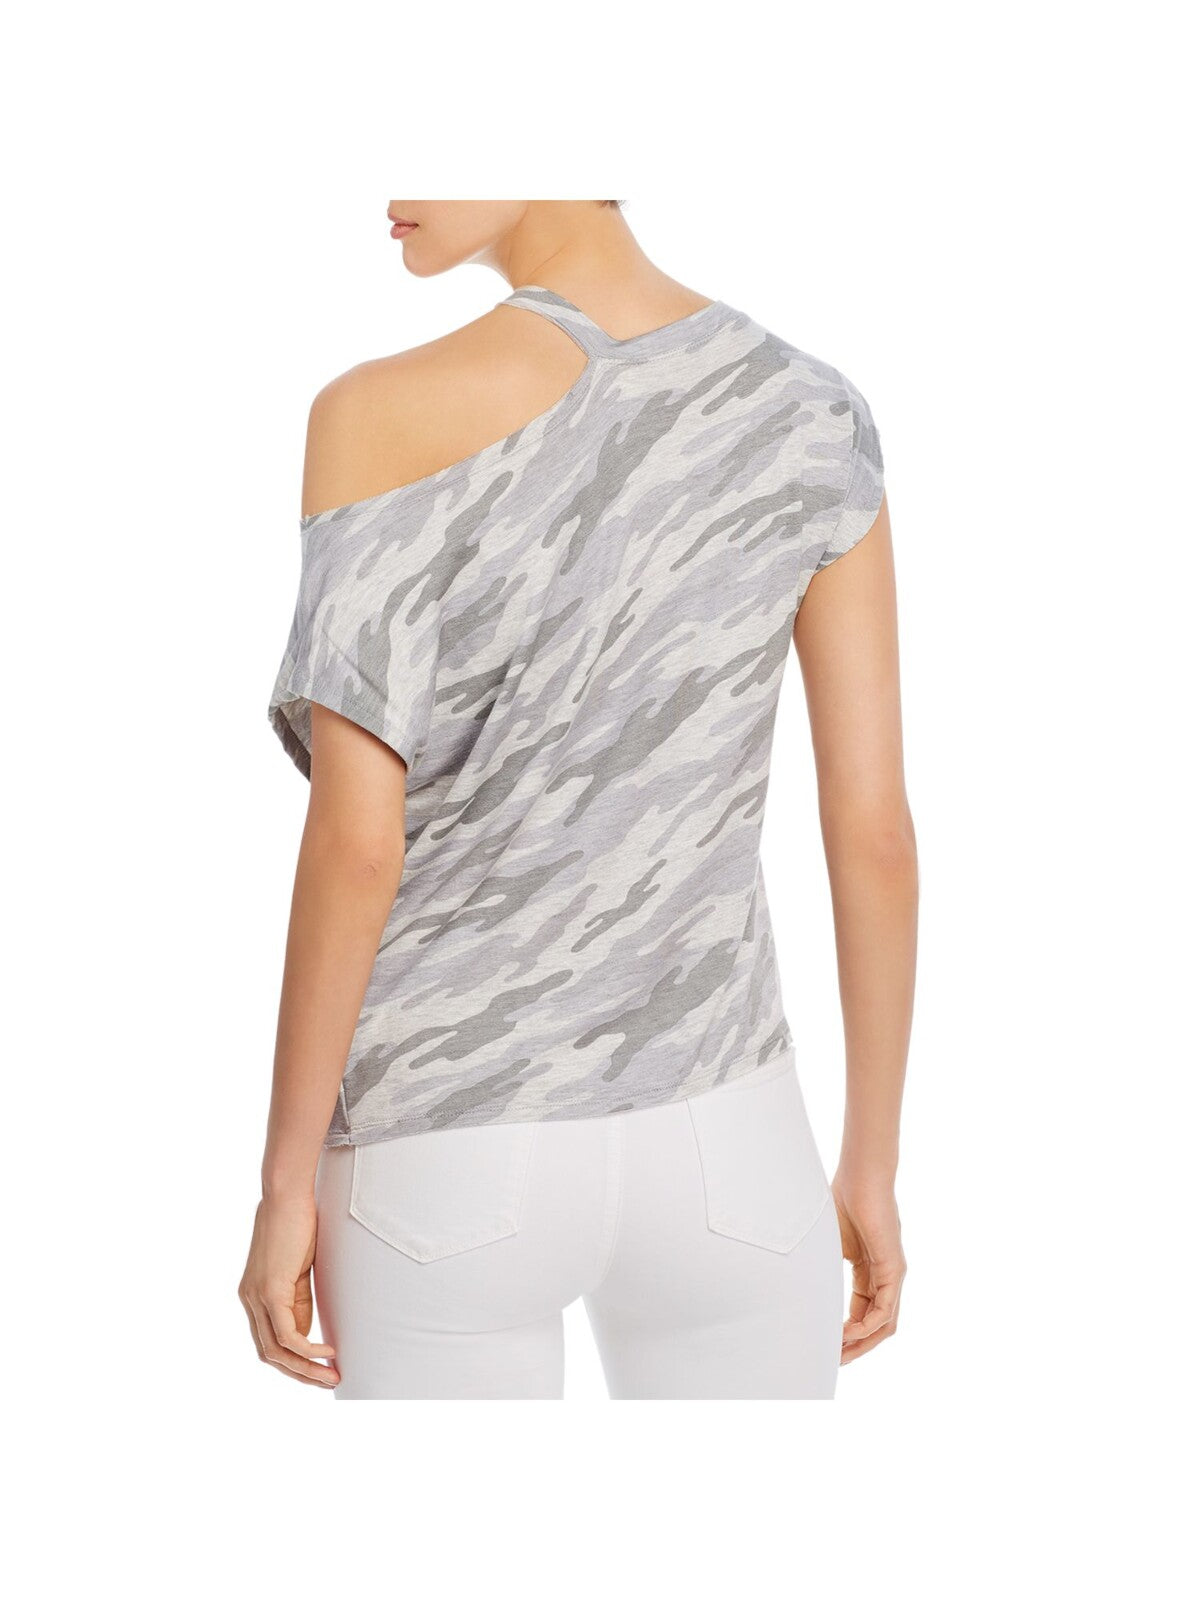 ELAN Womens Gray Stretch Cut Out Camouflage Cap Sleeve Crew Neck Top S